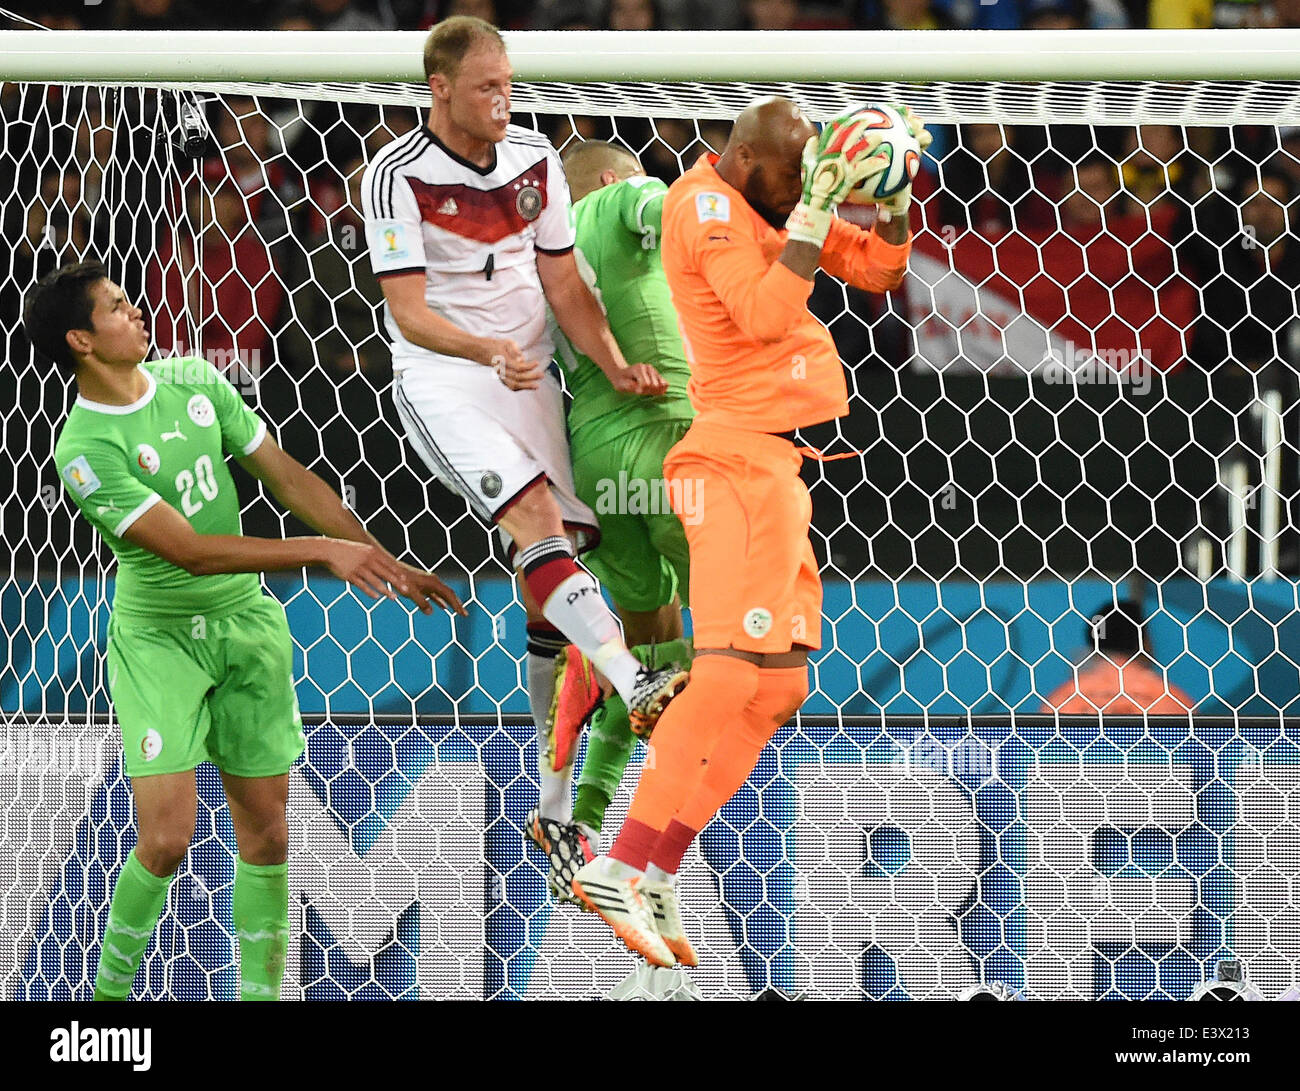 Porto Alegre, Brazil. 30th June, 2014. Goalkeeper Rais Mbolhi (R) of Algeria catches a ball next to Germany's Andre Schuerrle (2-L) during the FIFA World Cup 2014 round of 16 soccer match between Germany and Algeria at the Estadio Beira-Rio in Porto Alegre, Brazil, 30 June 2014. Photo: Marcus Brandt/dpa/Alamy Live News Stock Photo